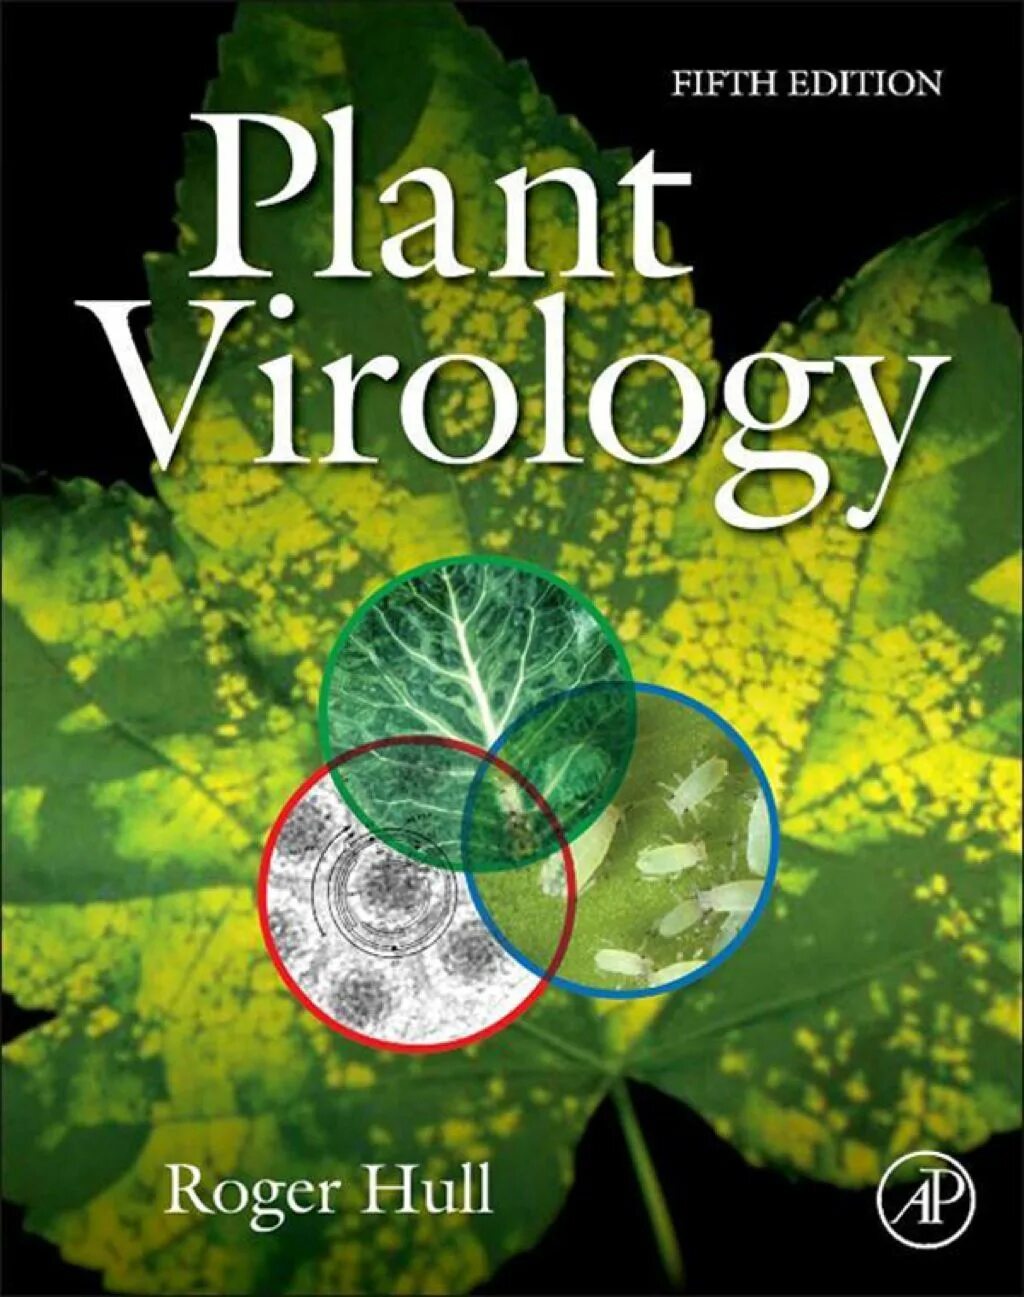 Virology of the book. The Plant книга. Plant Virology. Plant Virology book. Книга plants